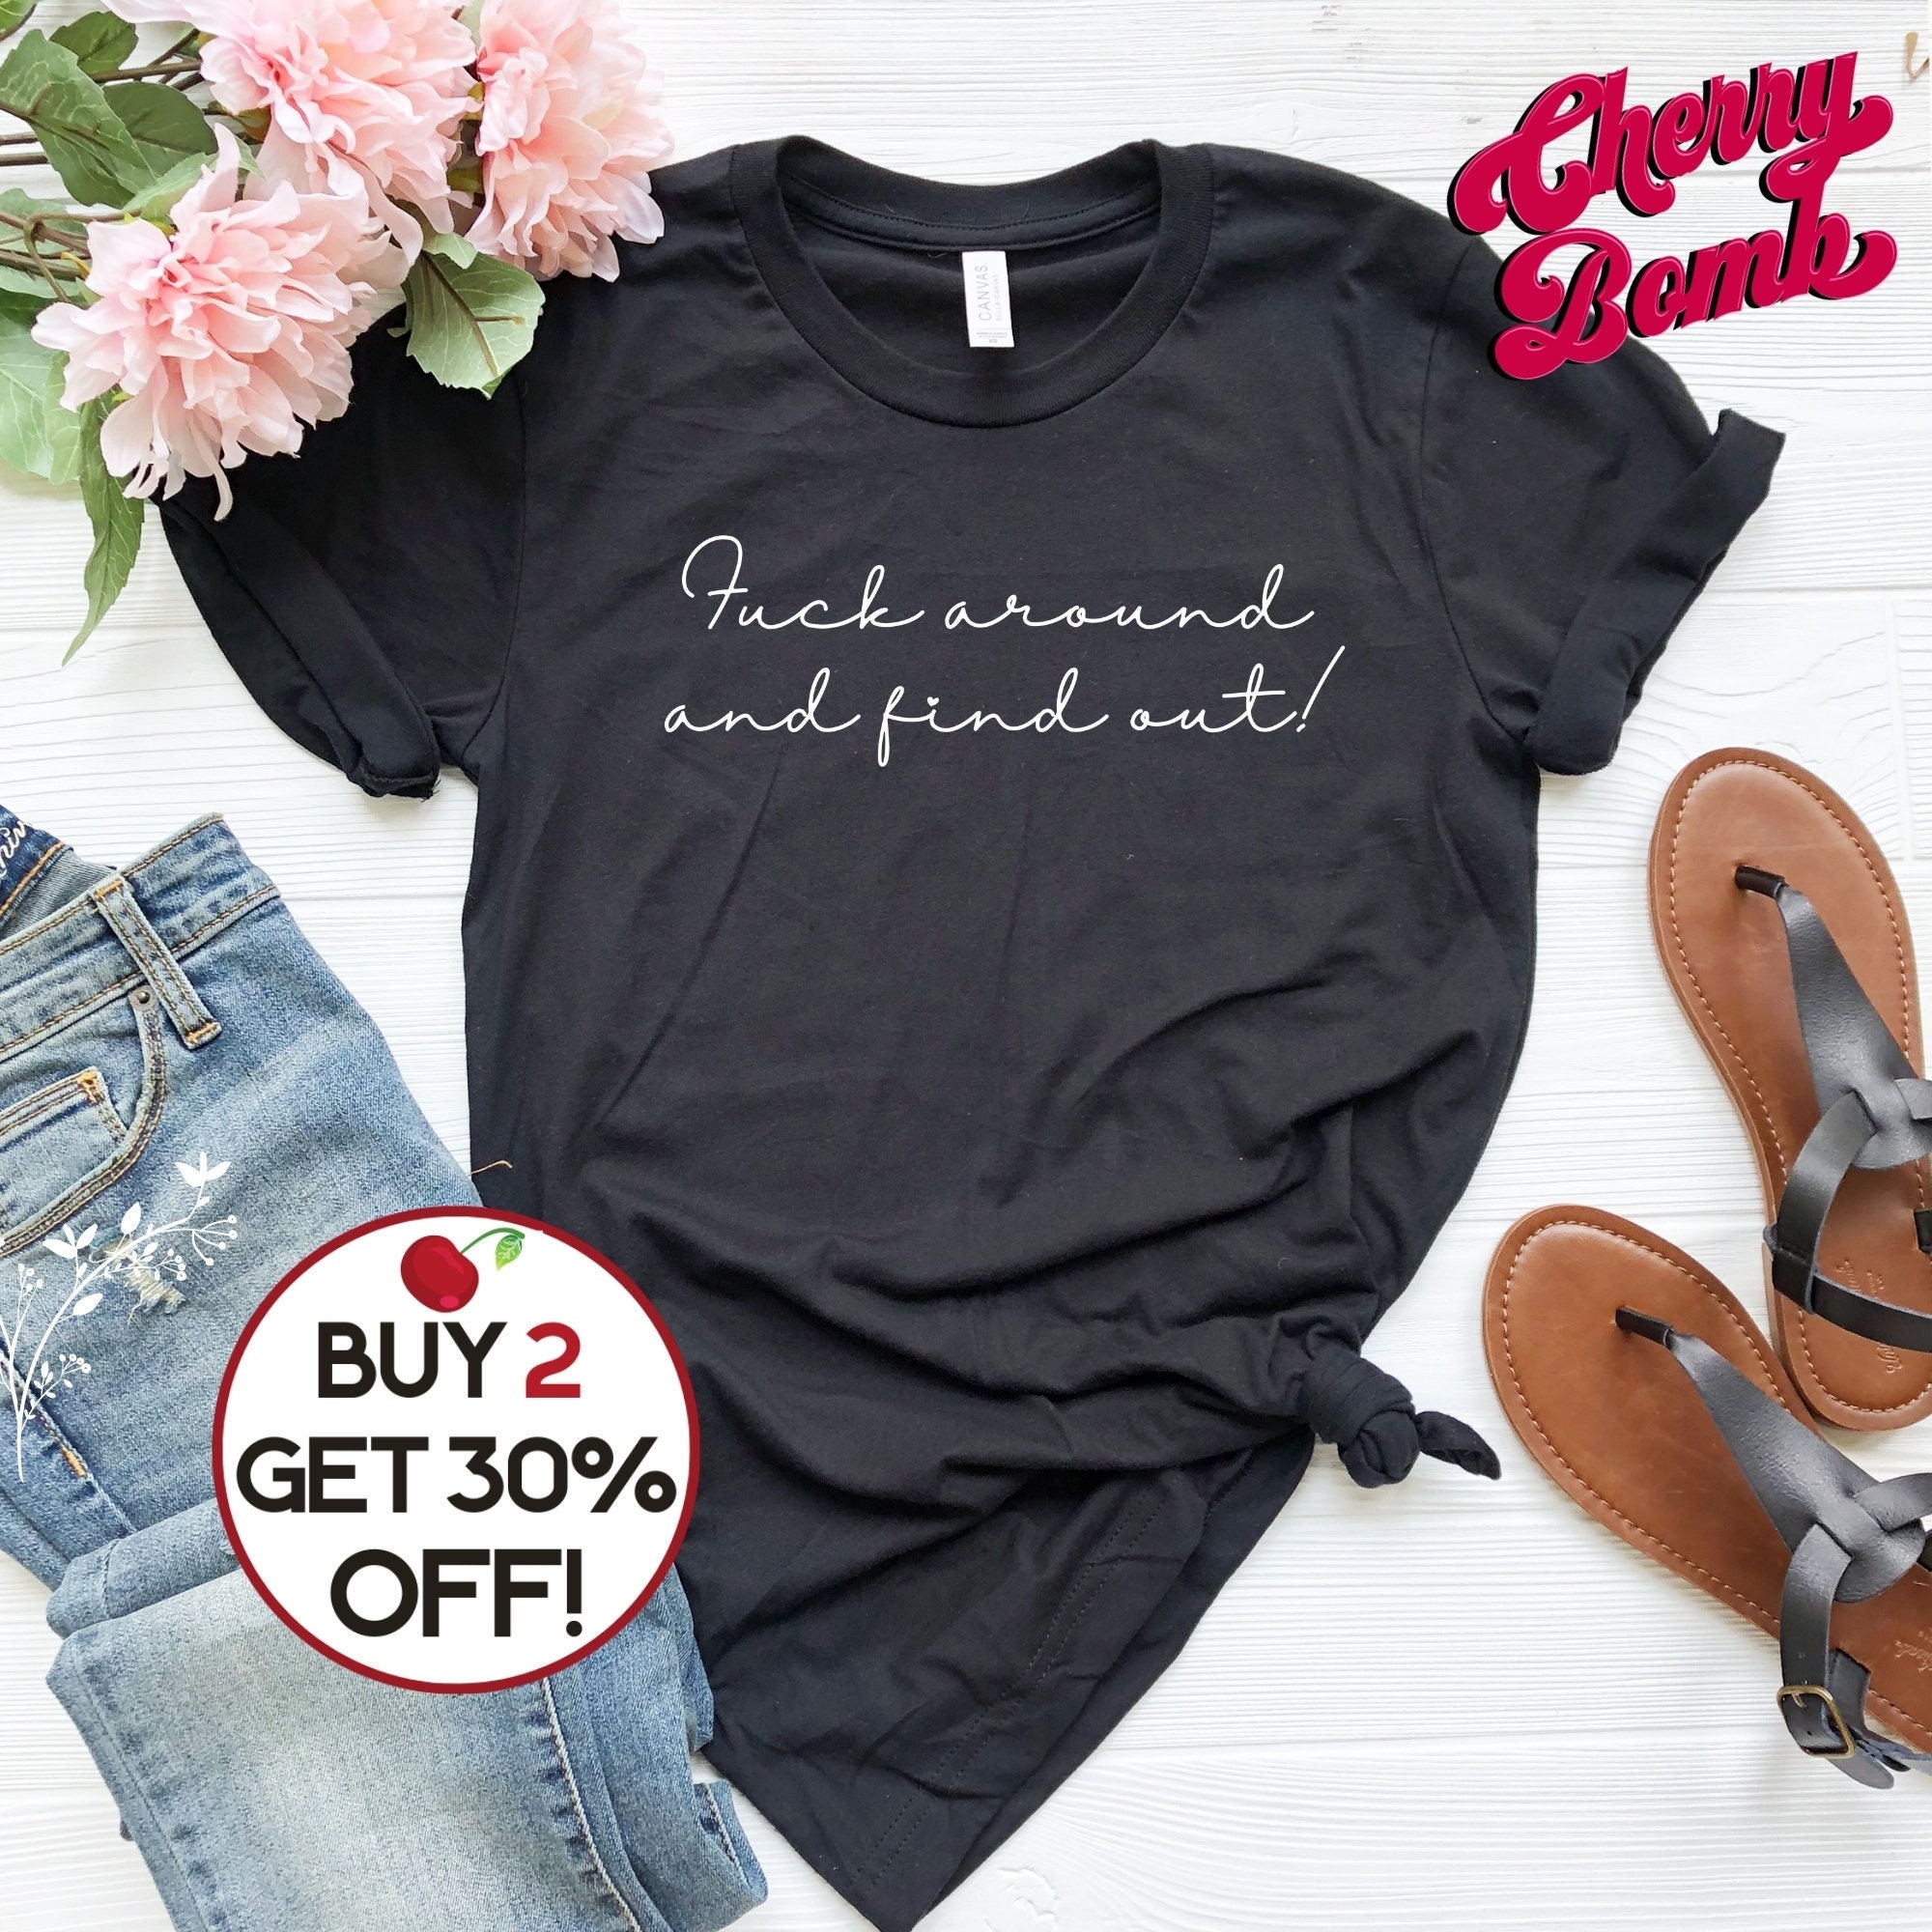 Fuck Around and Find Out T Shirt - Spencer's